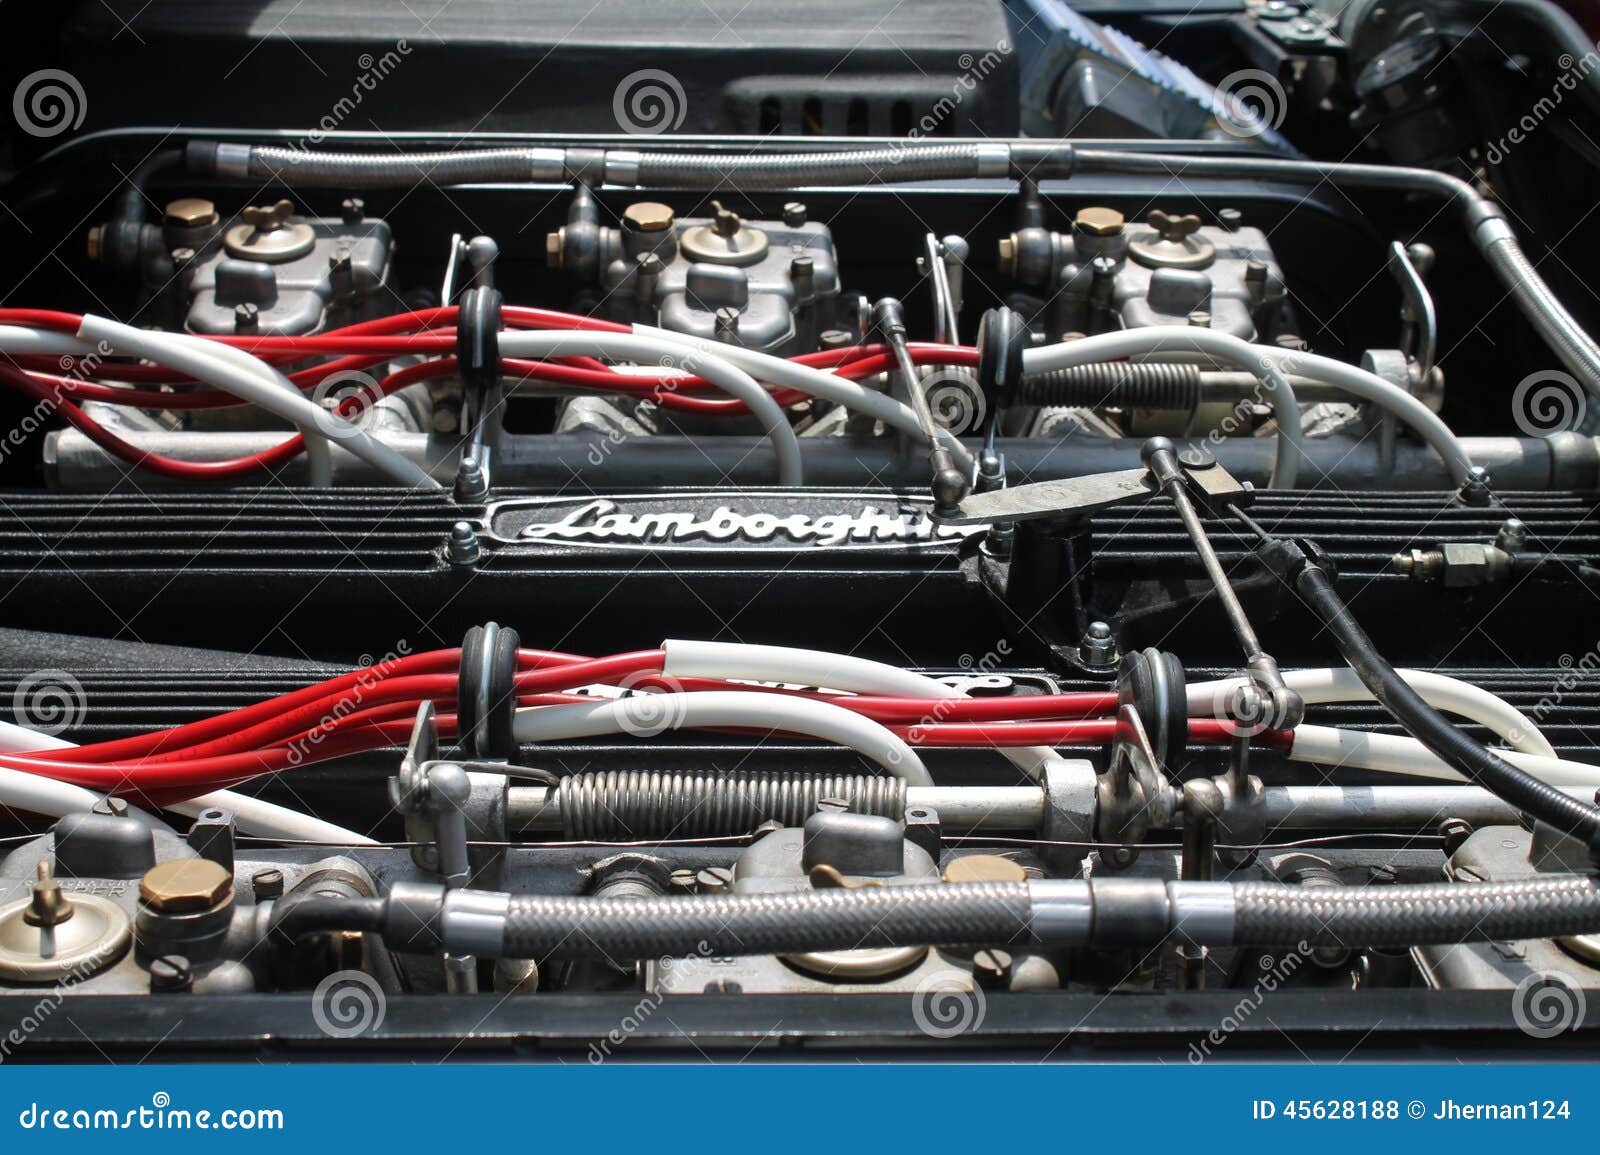 Vintage Sports Car Engine Bay View Editorial Stock Photo  Image 